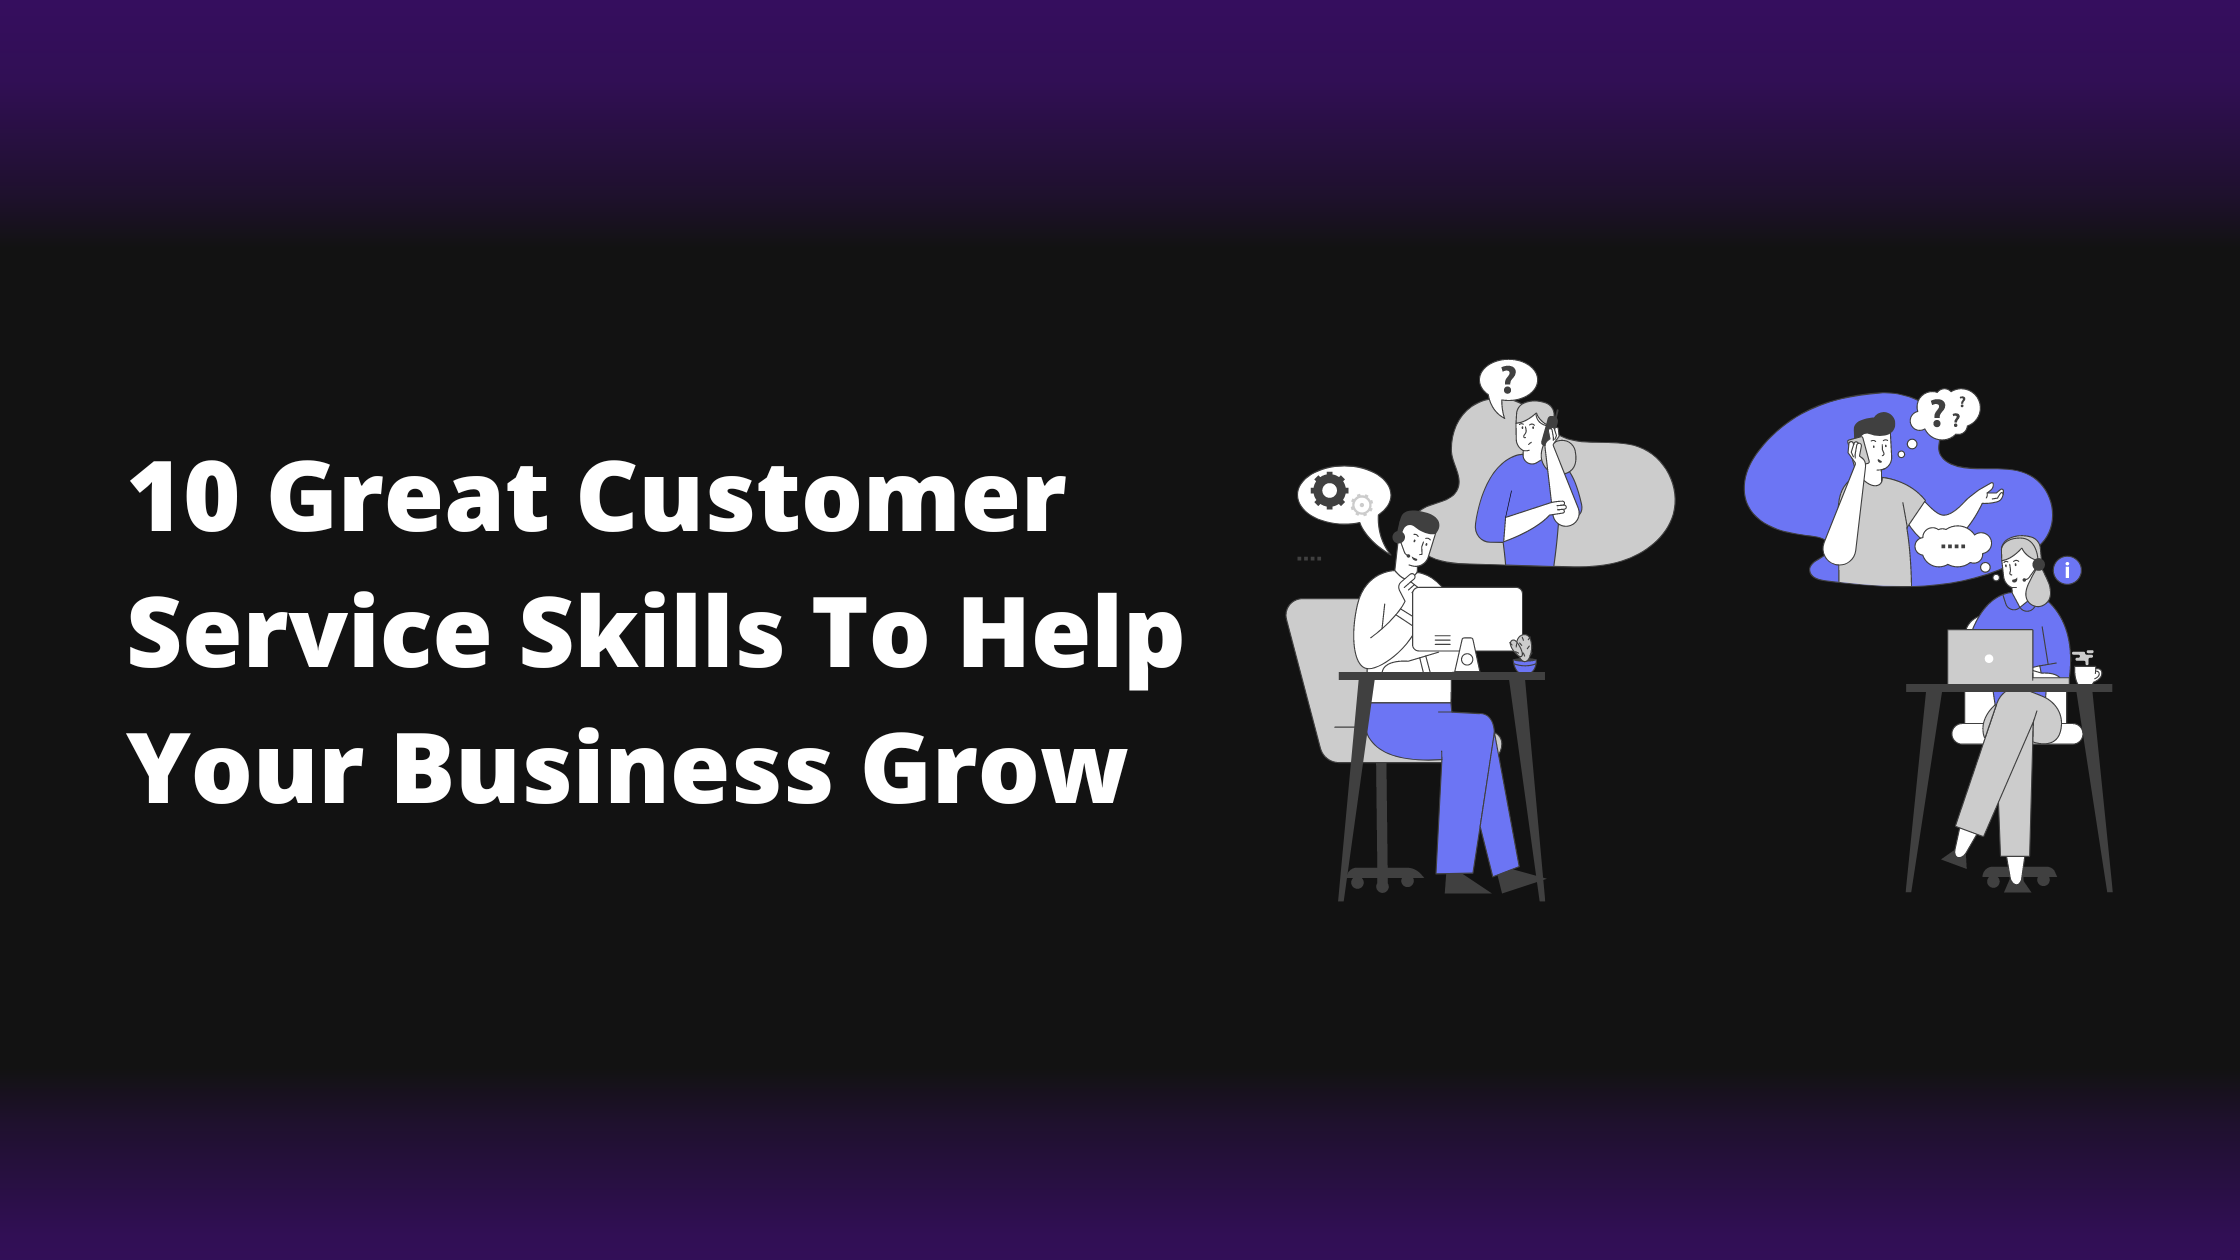 10 Great Customer Service Skills To Help Your Business Grow